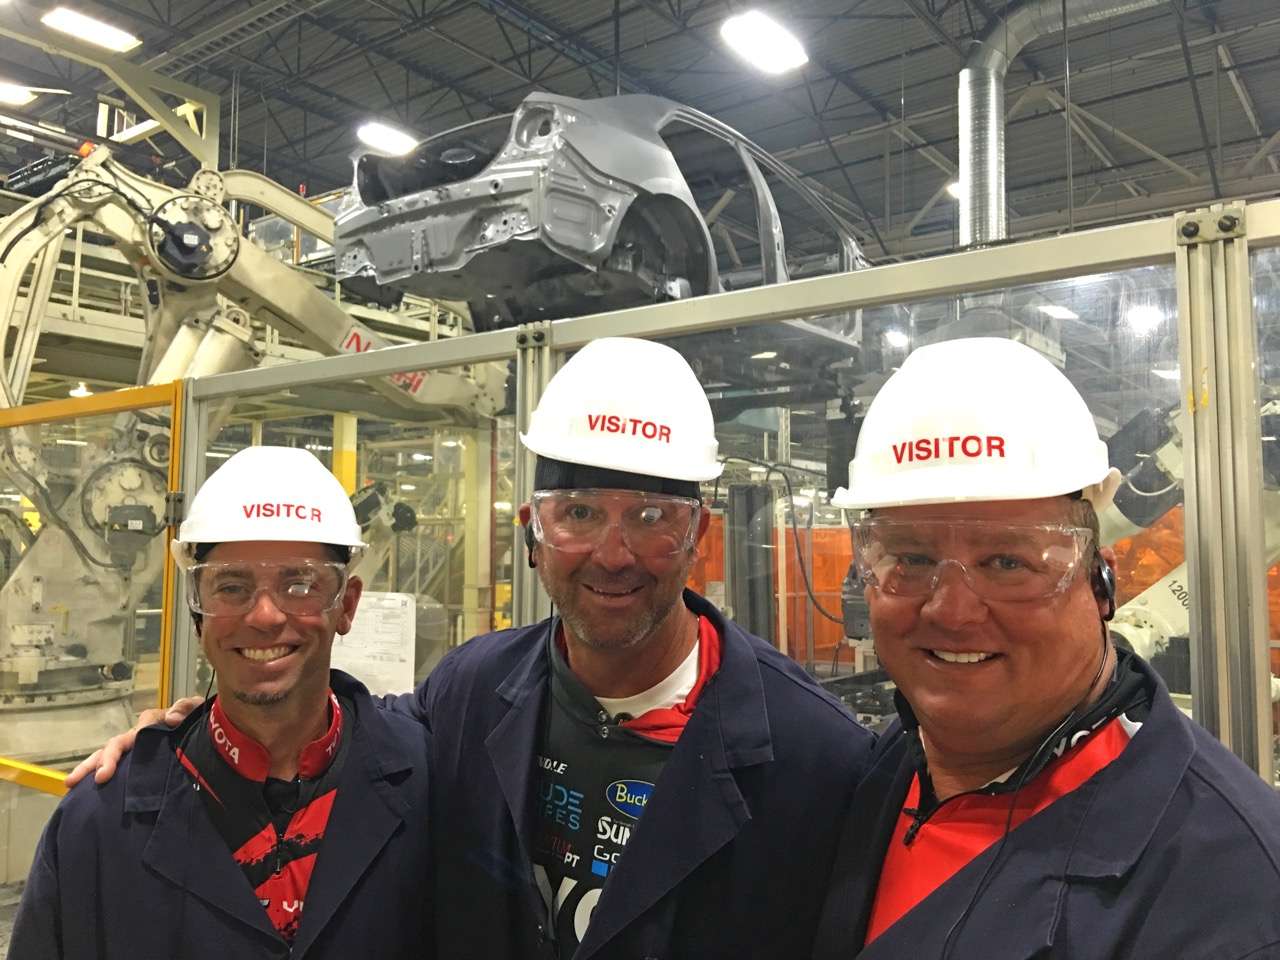 Safety is an overwhelmingly prominent theme at the facility where more than 40 avid bass club members proudly build Toyota Corollas â and the pros were not immune to protective headwear, eyewear and clothing. 
